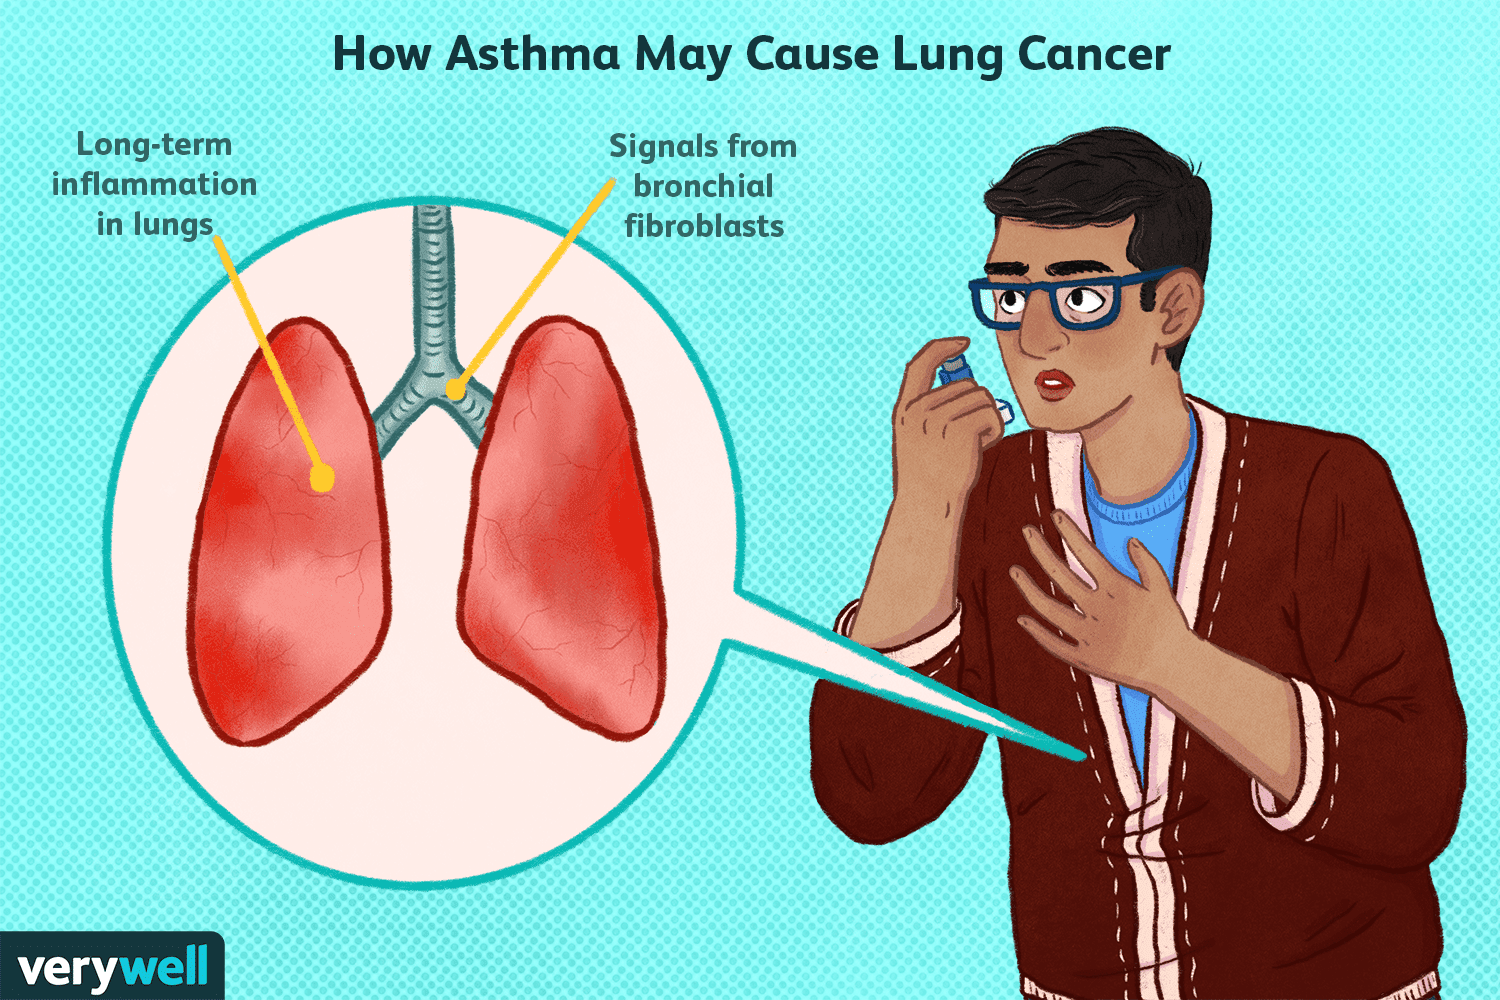 Asthma as a Possible Cause of Lung Cancer